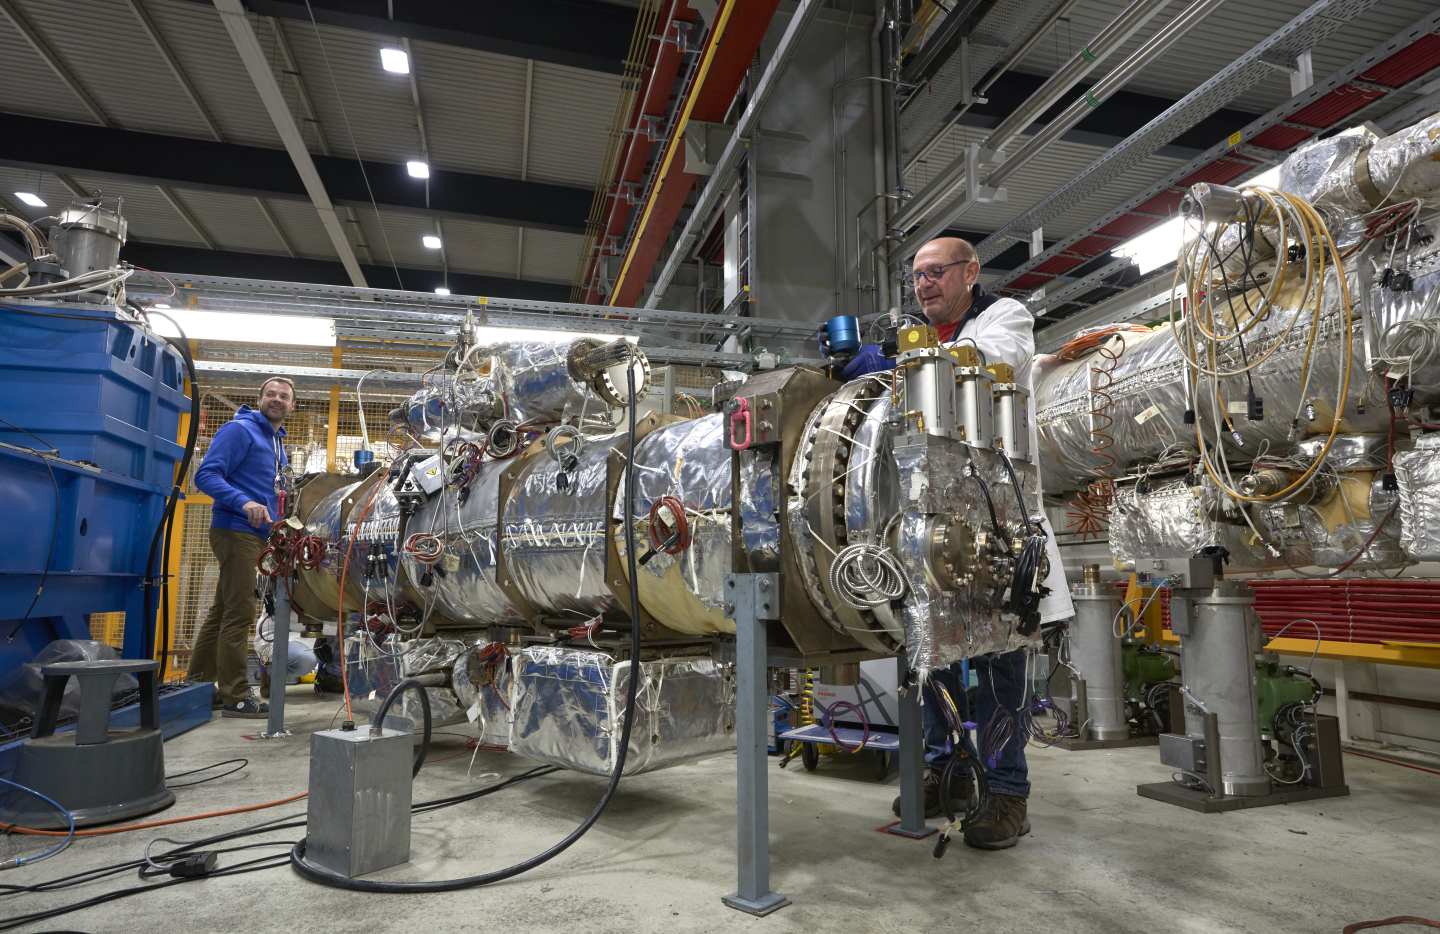 Works accelerate when the LHC sleeps